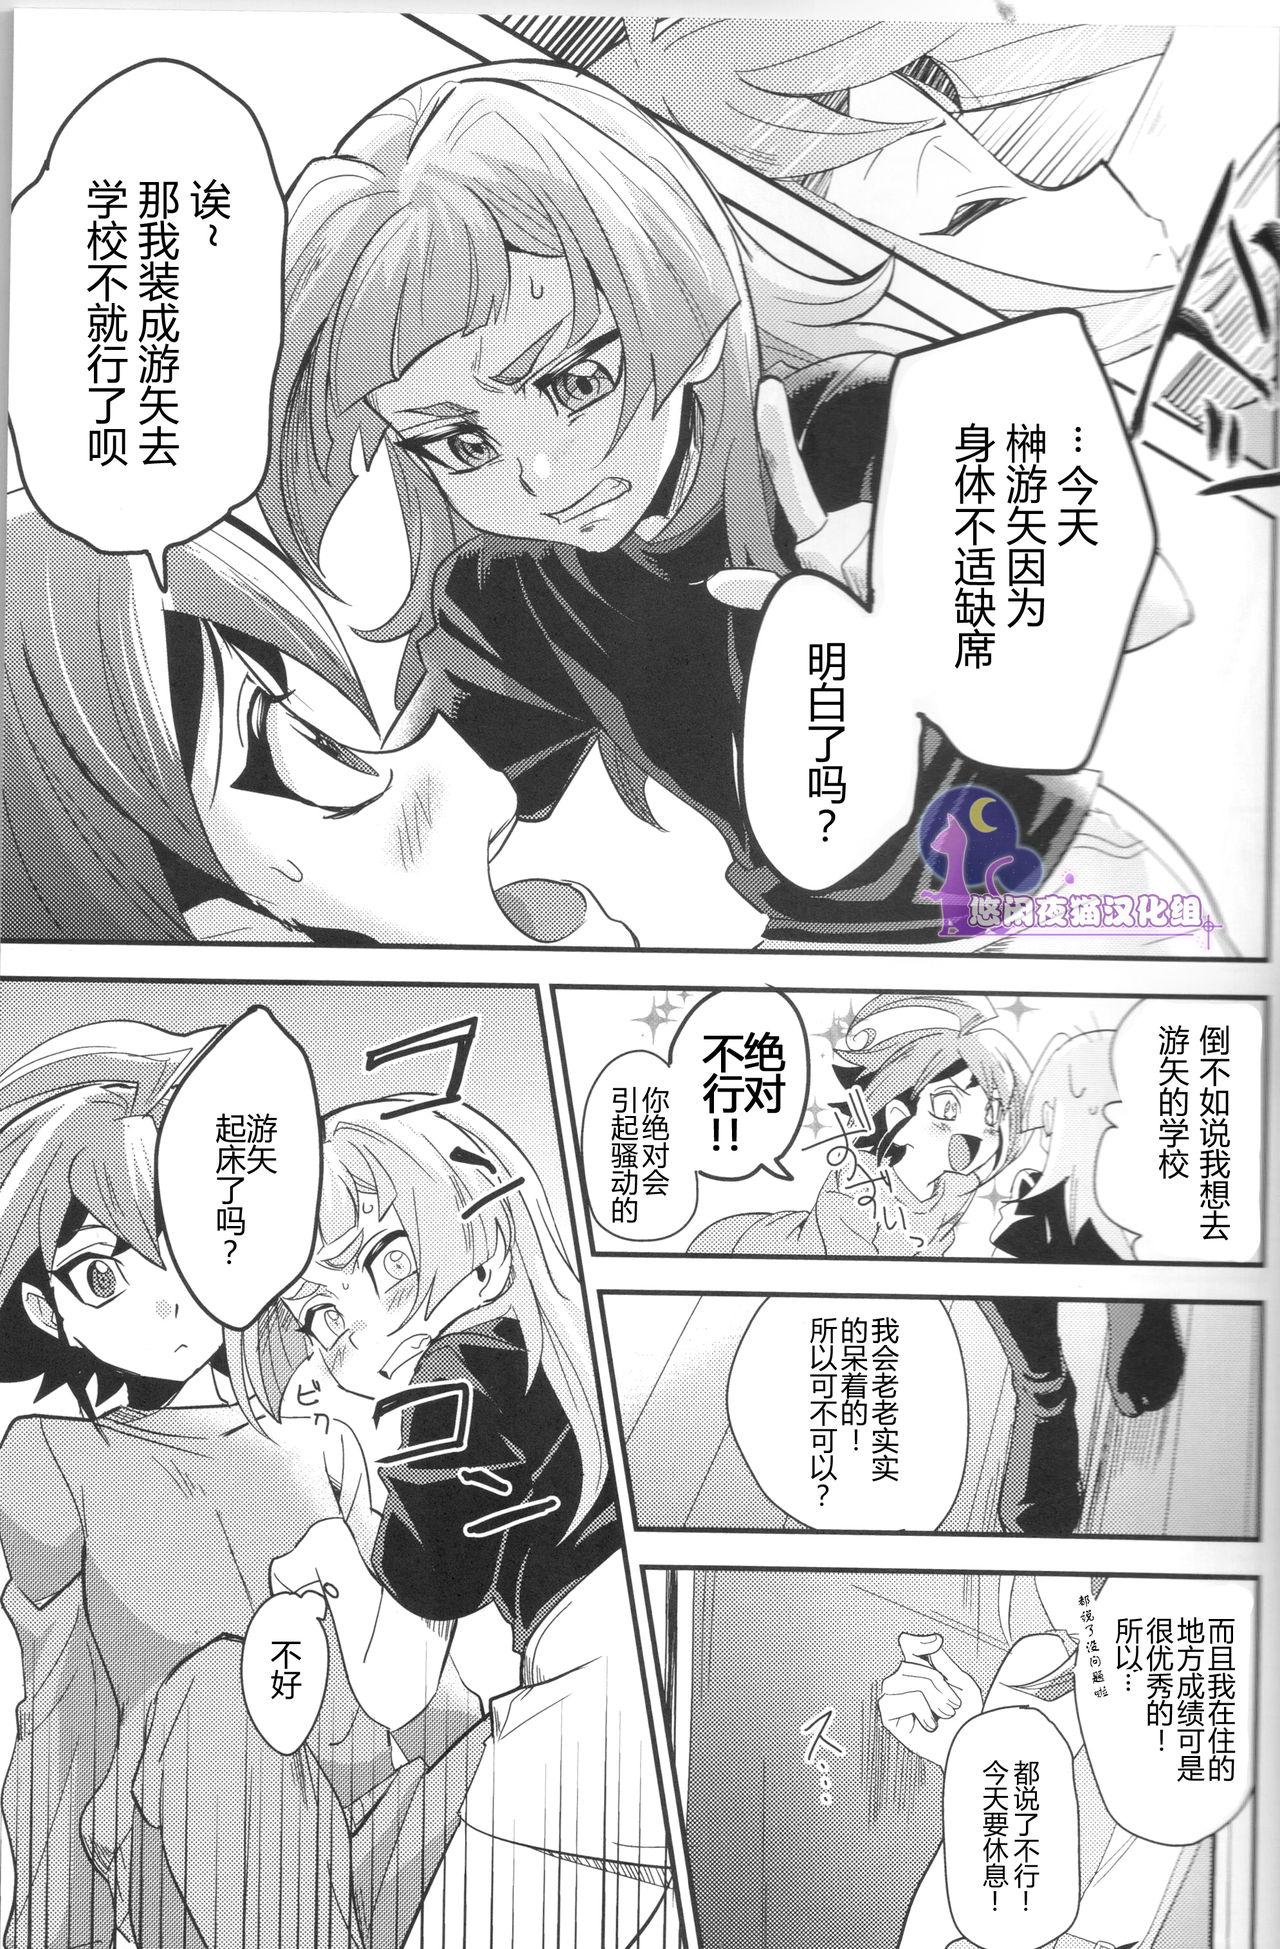 Candid CHANGE - Yu-gi-oh arc-v Hot Whores - Page 7